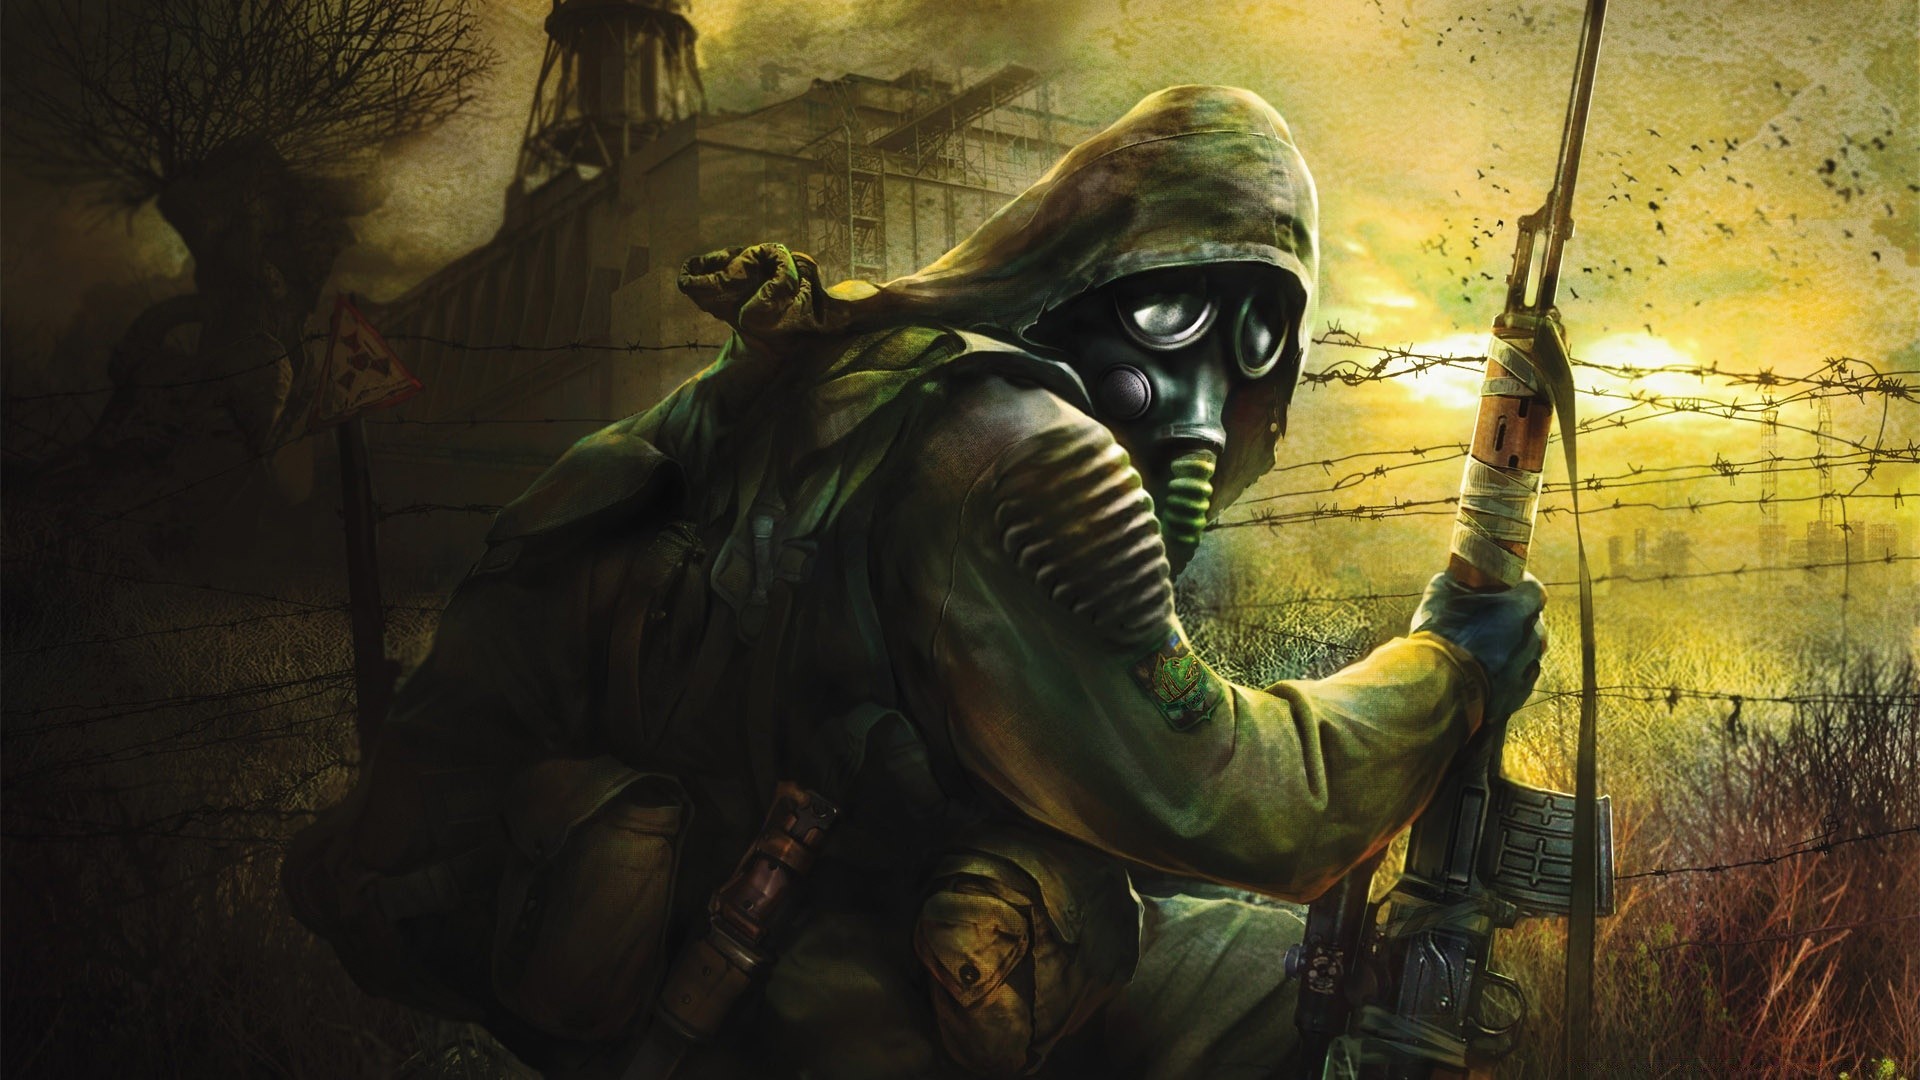 s.t.a.l.k.e.r. painting wear art adult war one man woman weapon illustration military